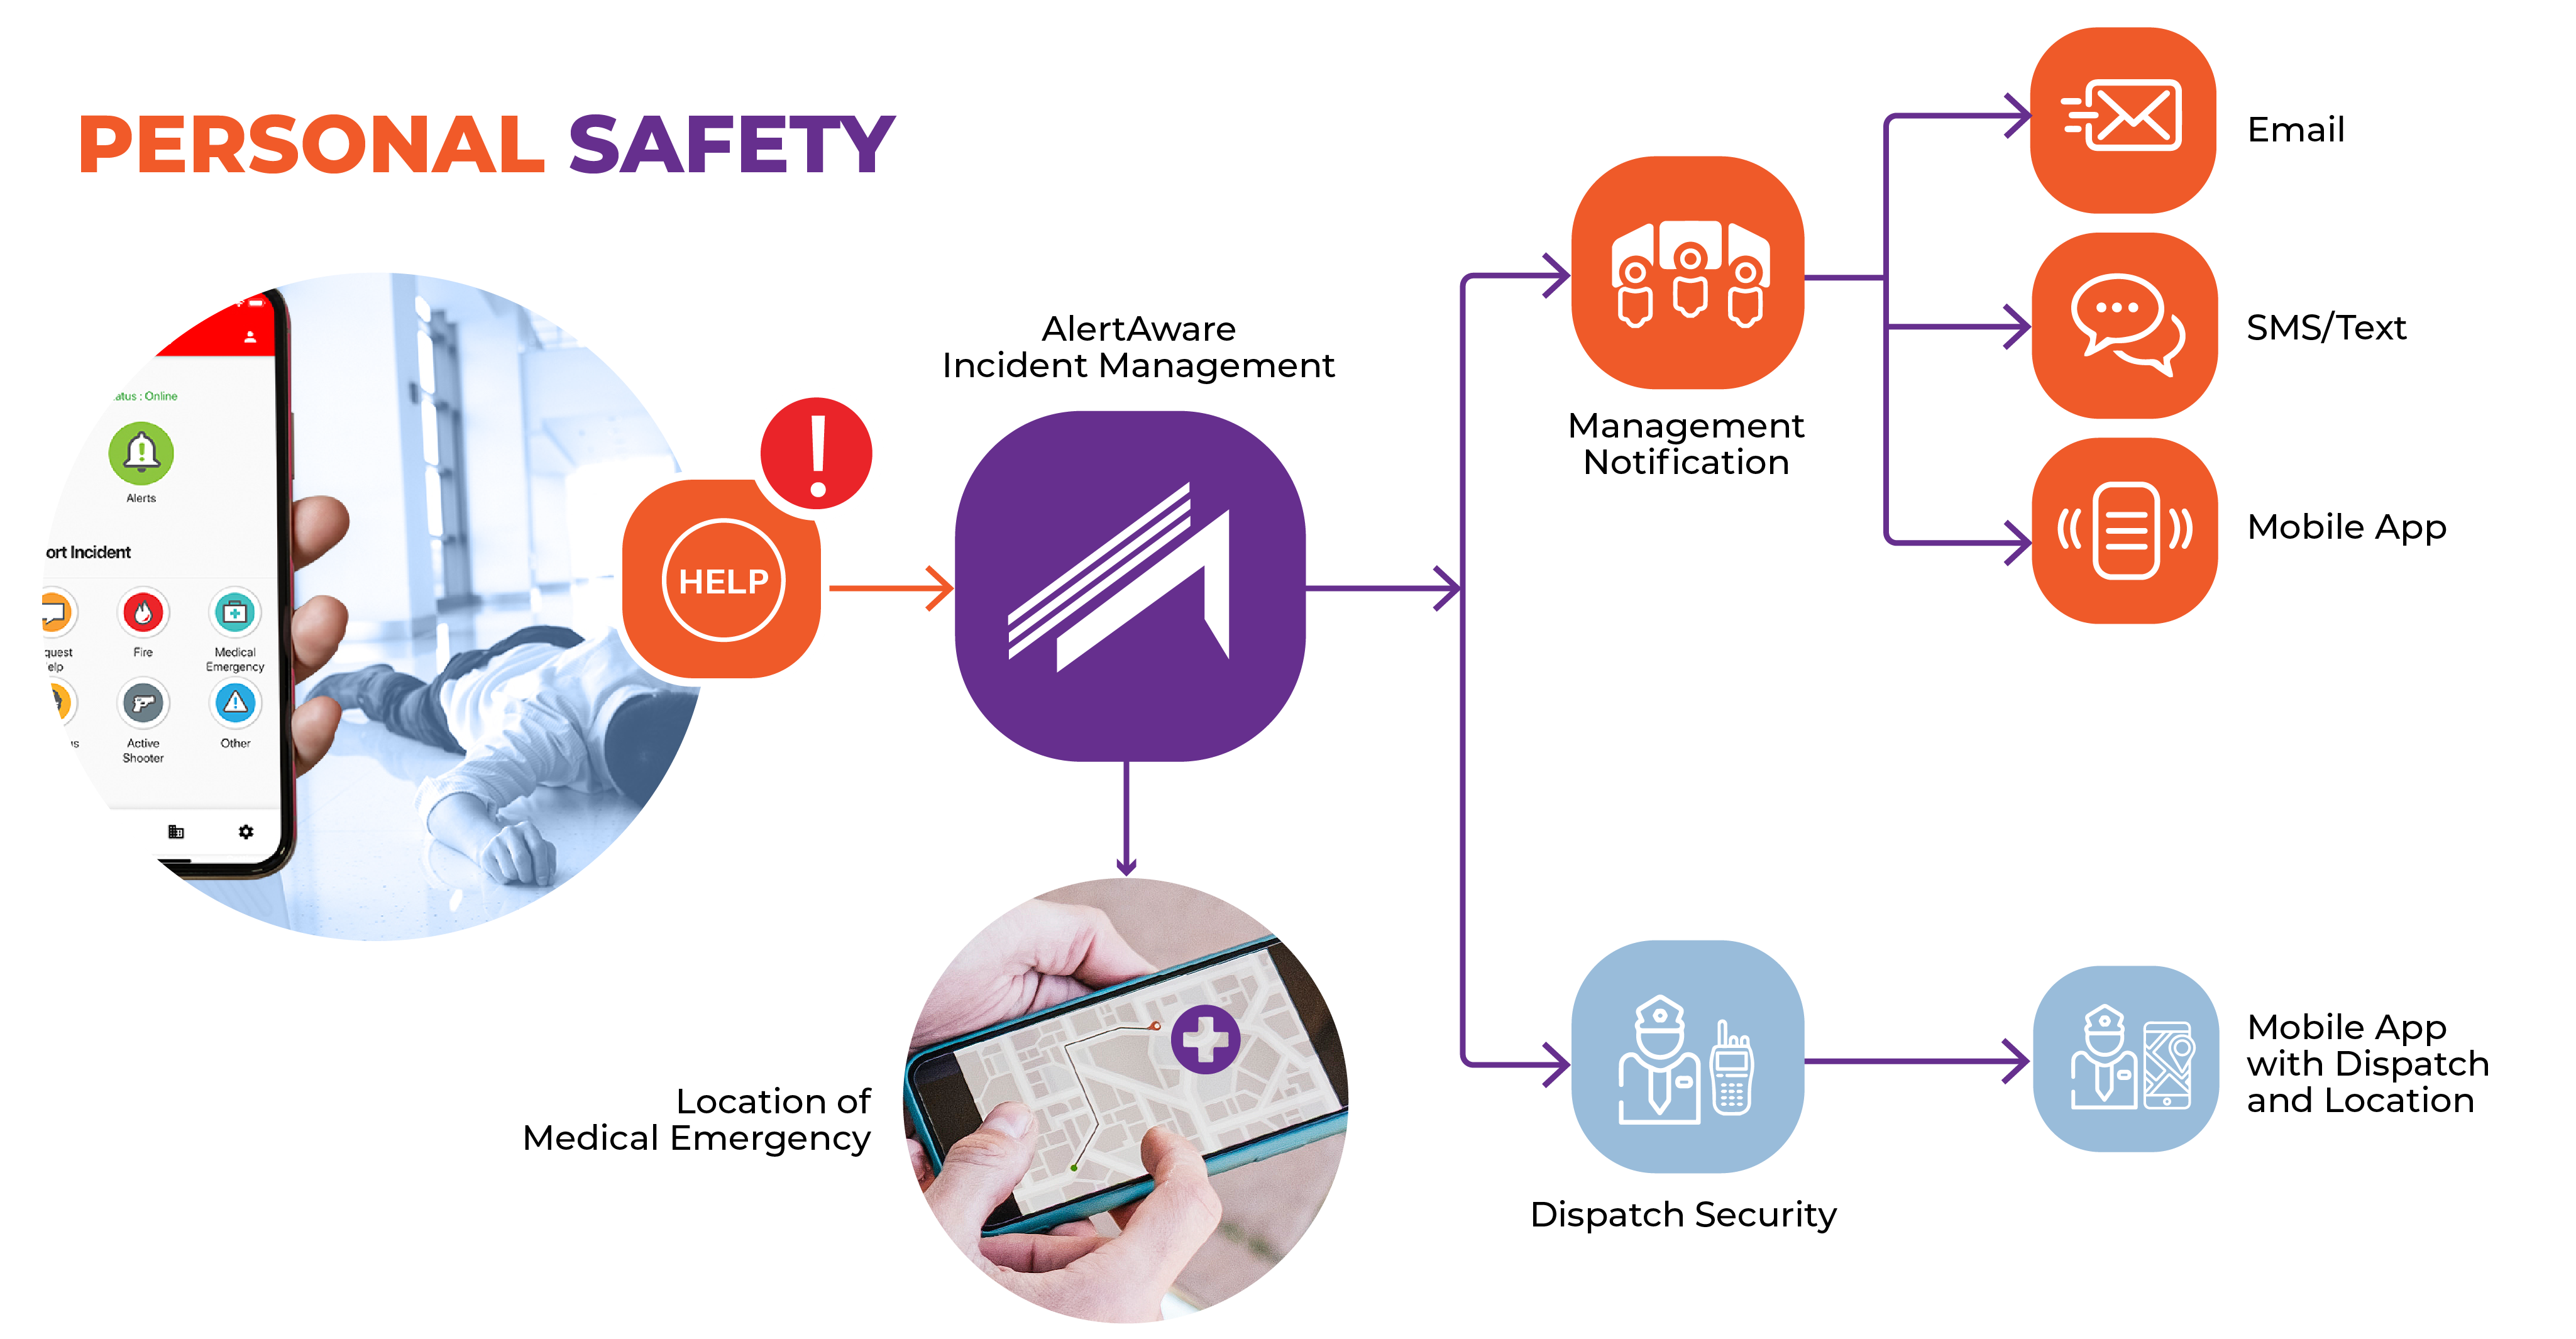 Personal Safety: Panic Button Activation and Incident Reporting and Notification